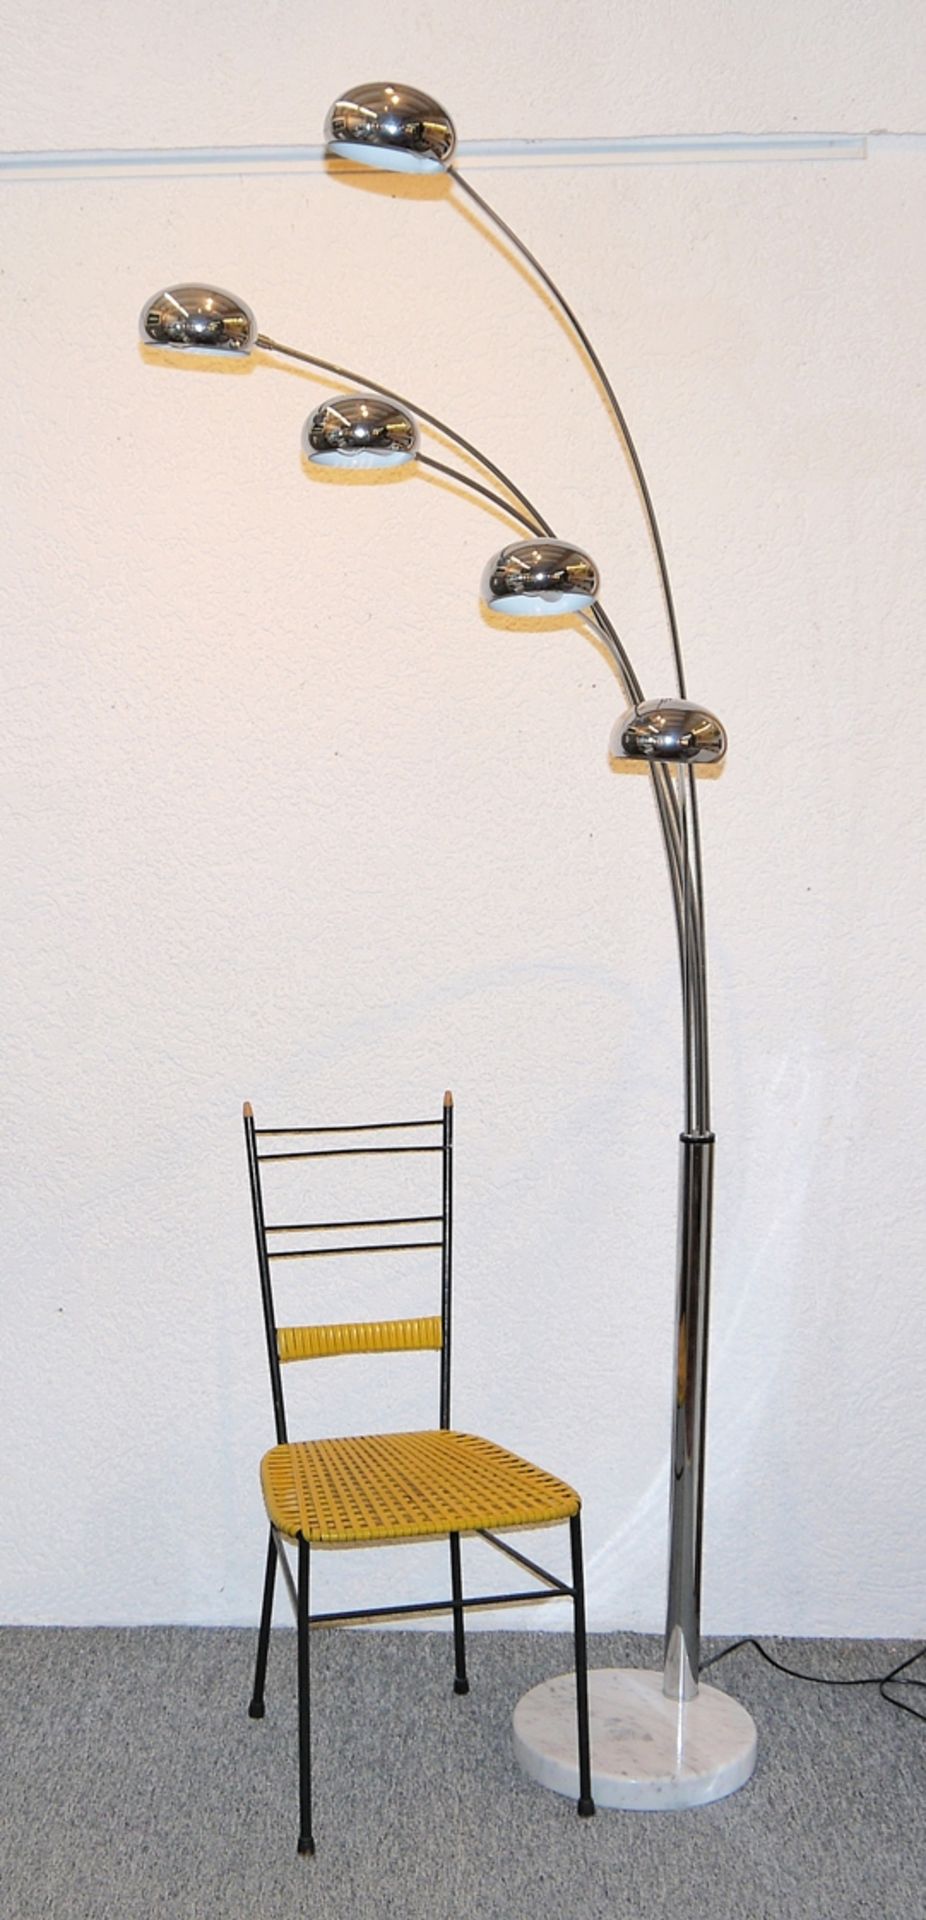 Retro floor lamp "five fingers" and "Spagetti" chair from the 1950s 